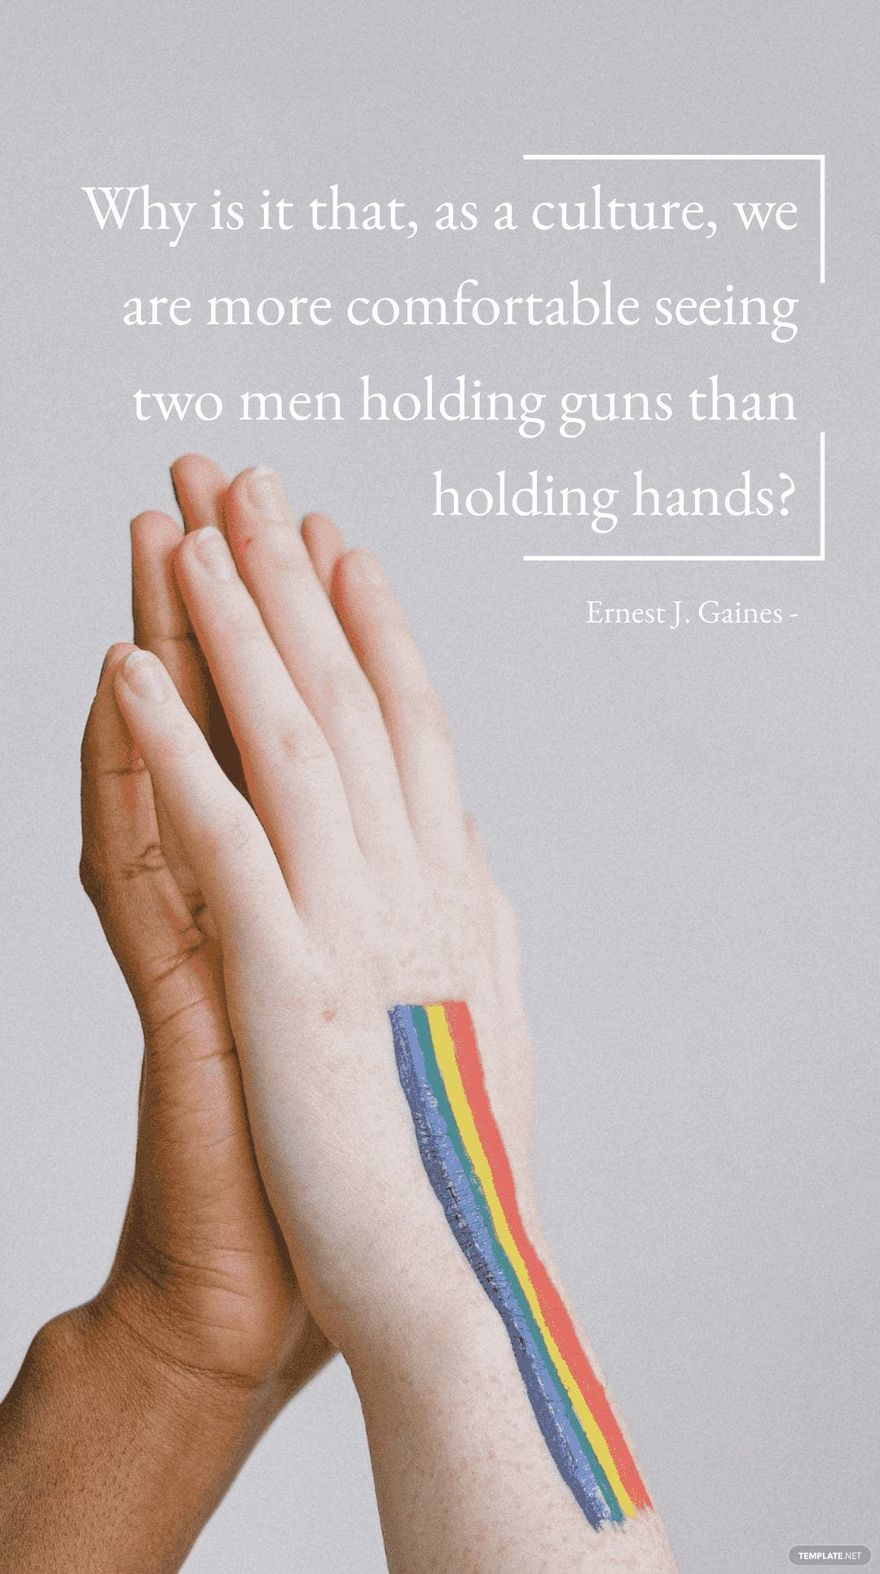 Free Ernest J. Gaines - Why is it that, as a culture, we are more comfortable seeing two men holding guns than holding hands?